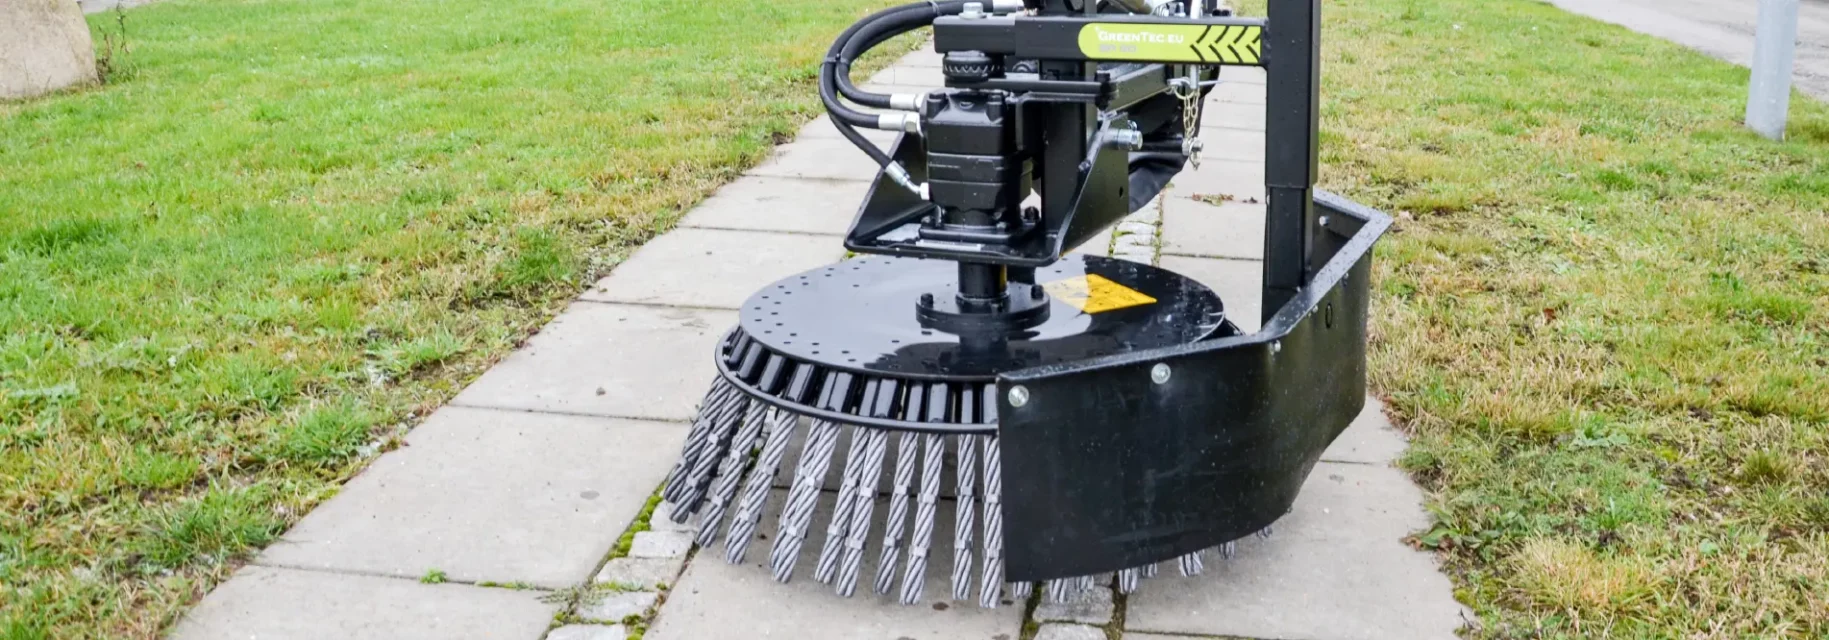 Weed brush machine for tractor